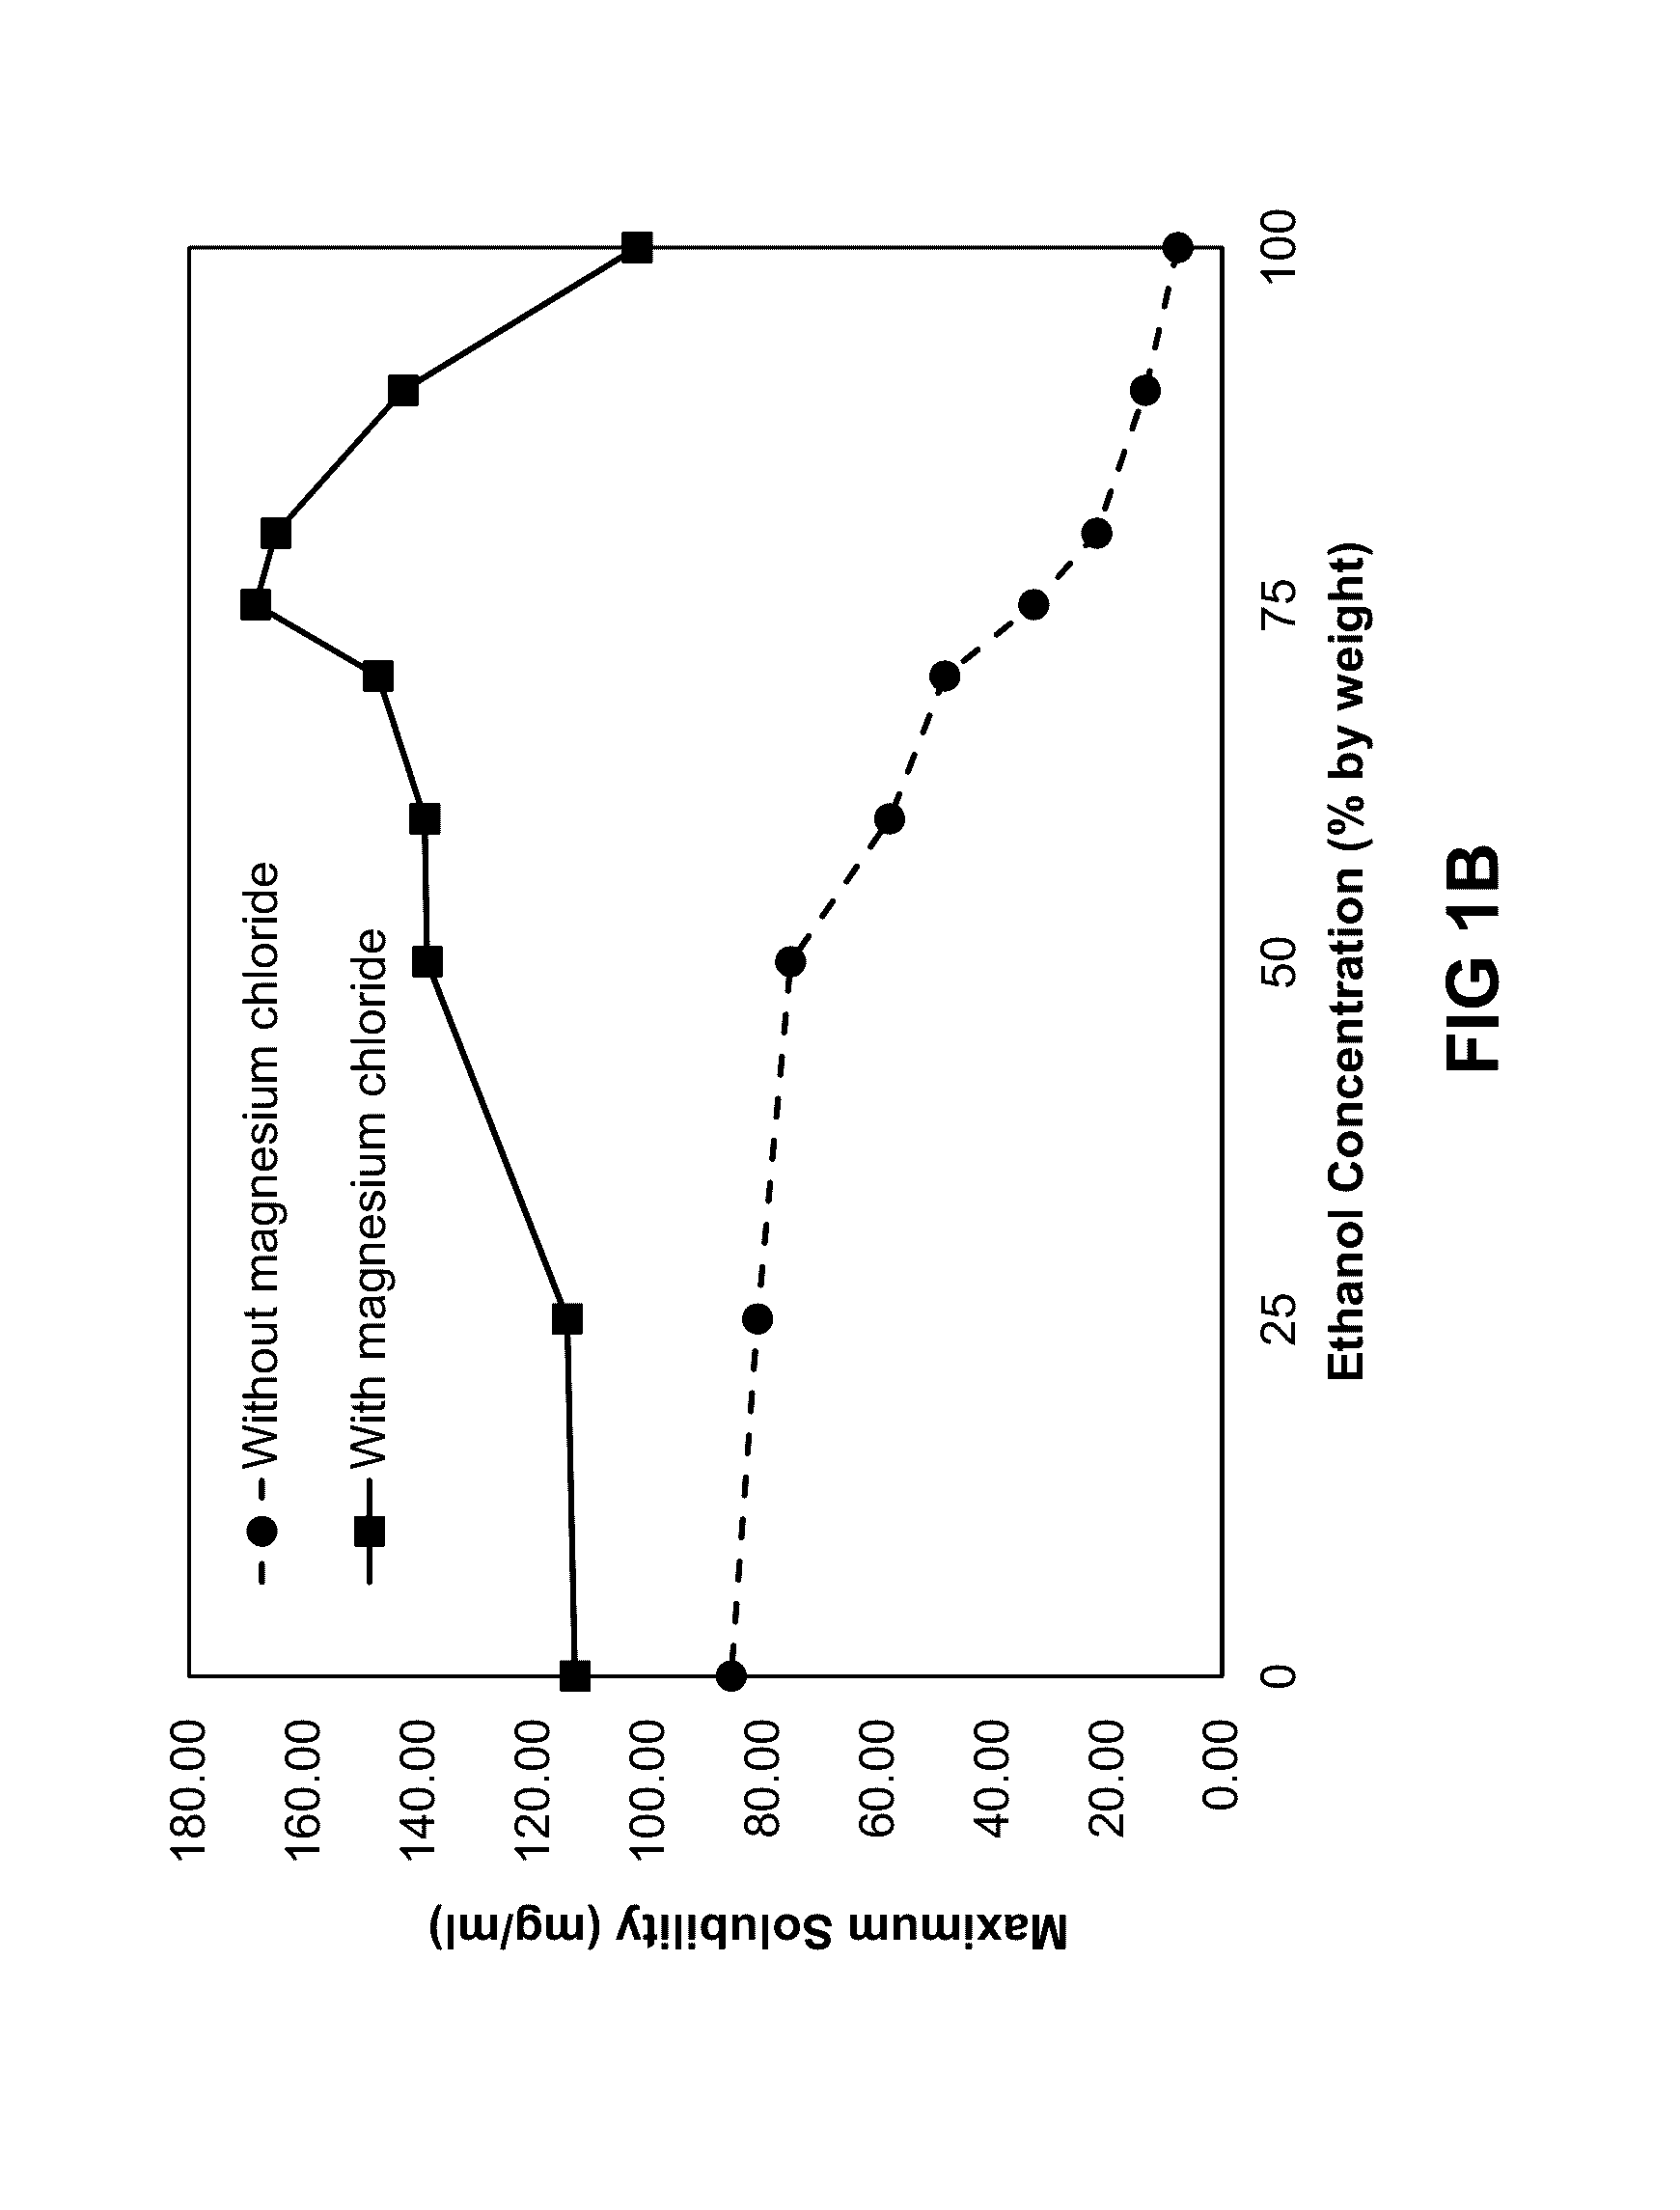 Pharmaceutical tetracycline composition for dermatological use